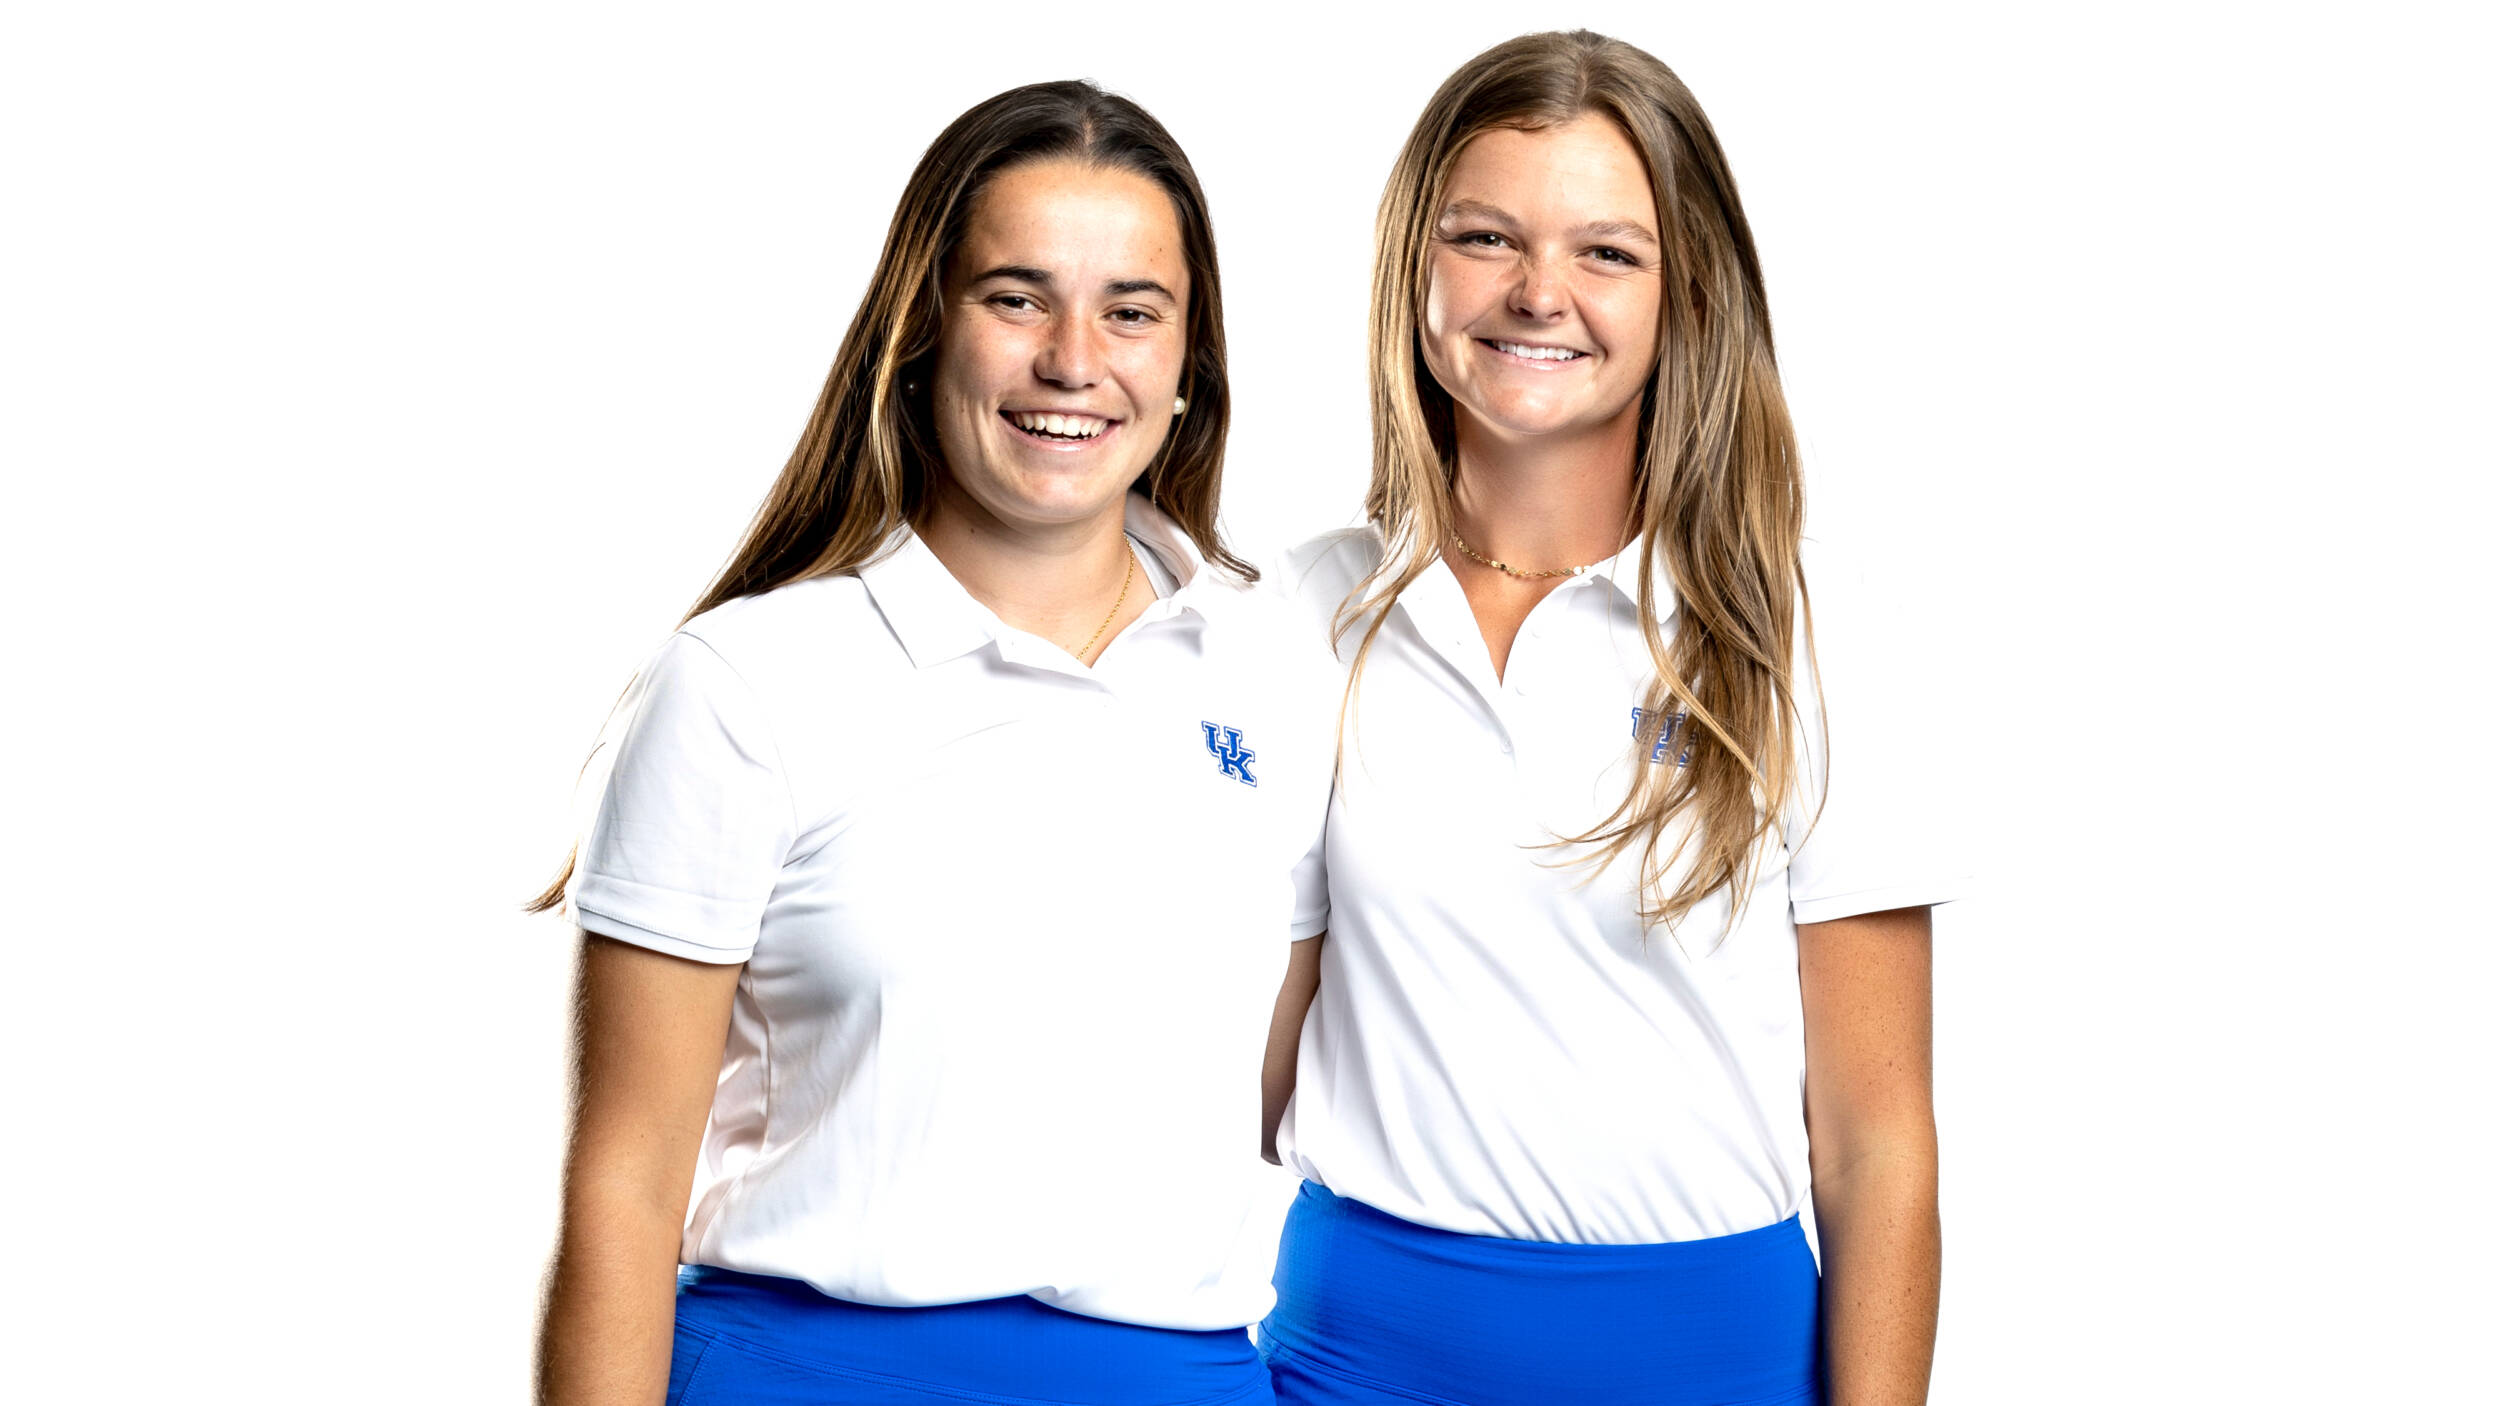 Kentucky Uses Final Round to Make a Push for Top Five in Fall Finale